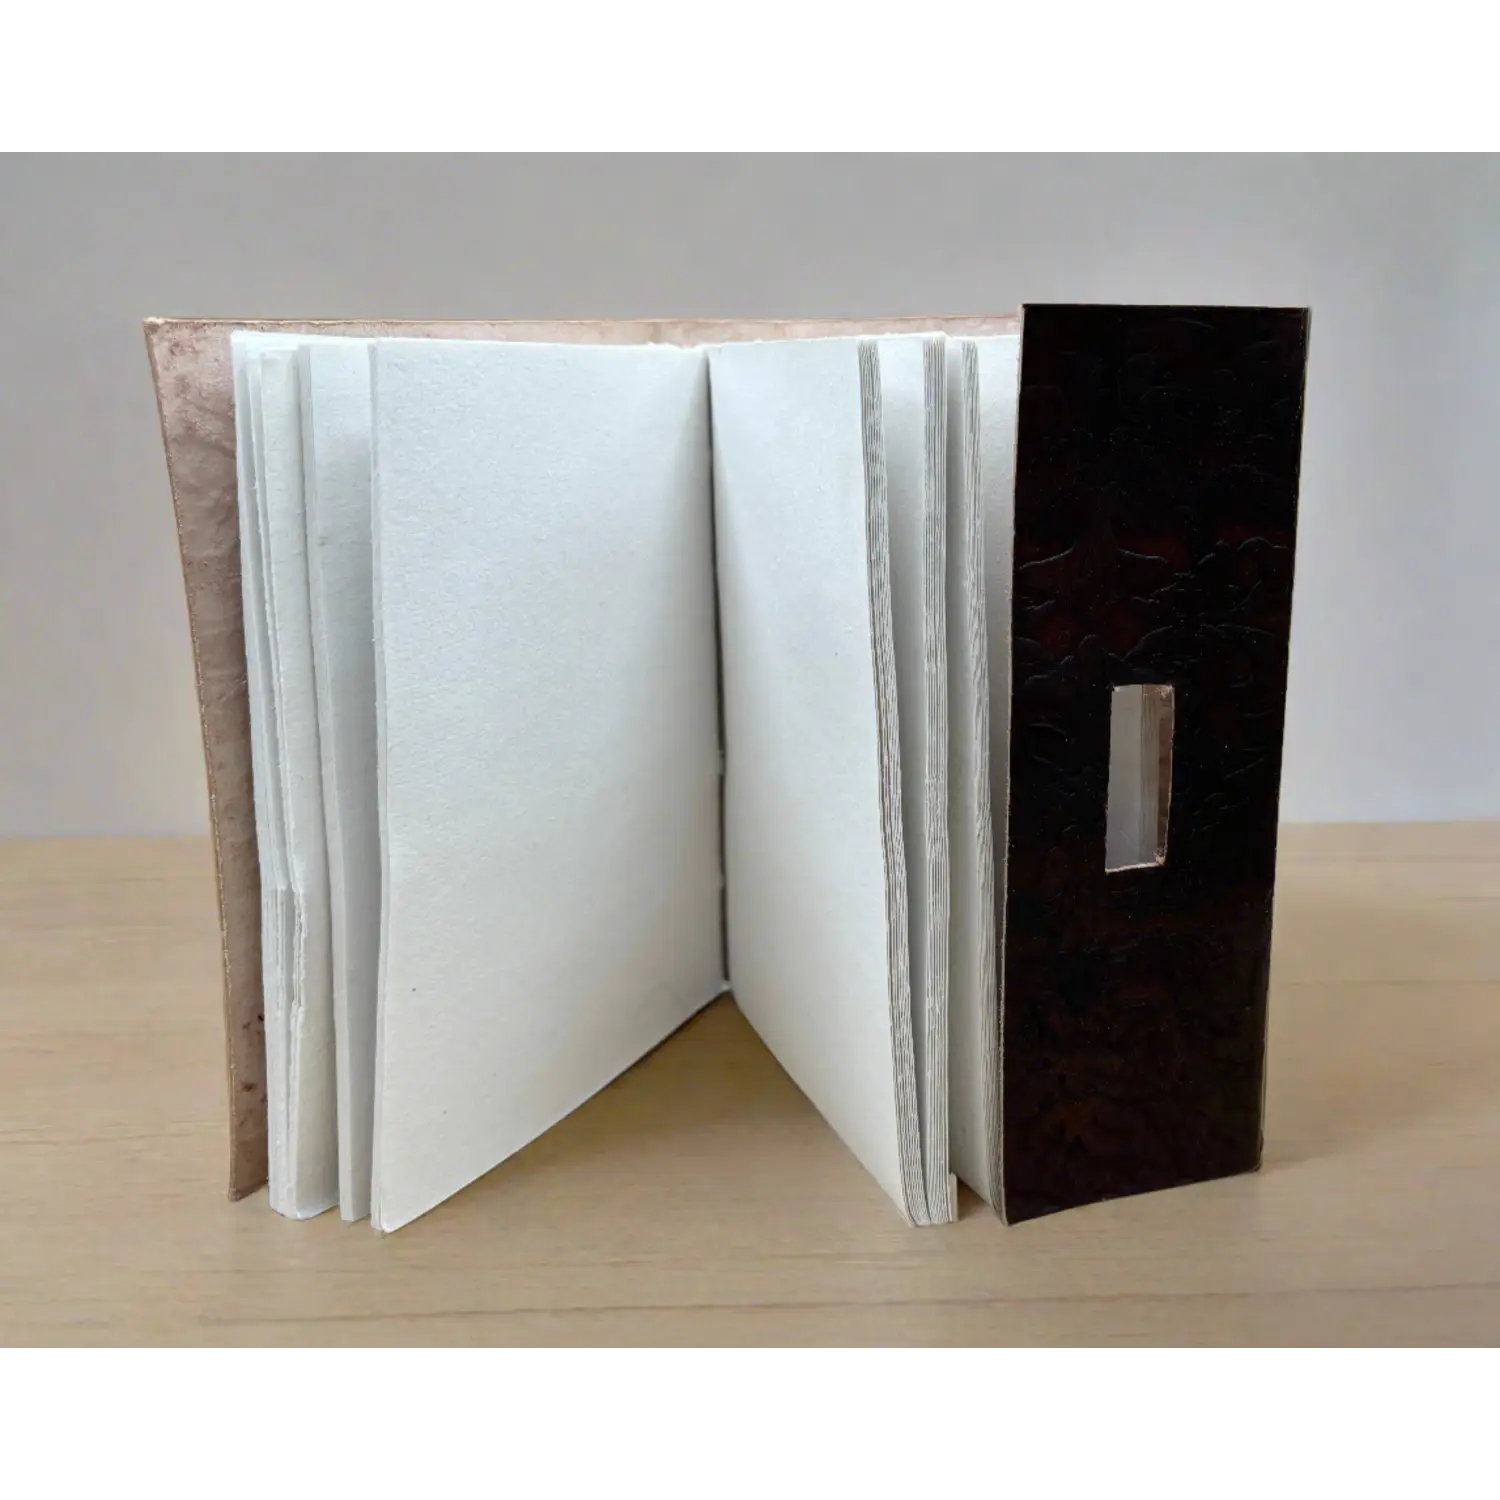 5in x 7in Leather Journal with Parchment Like Paper and Raw